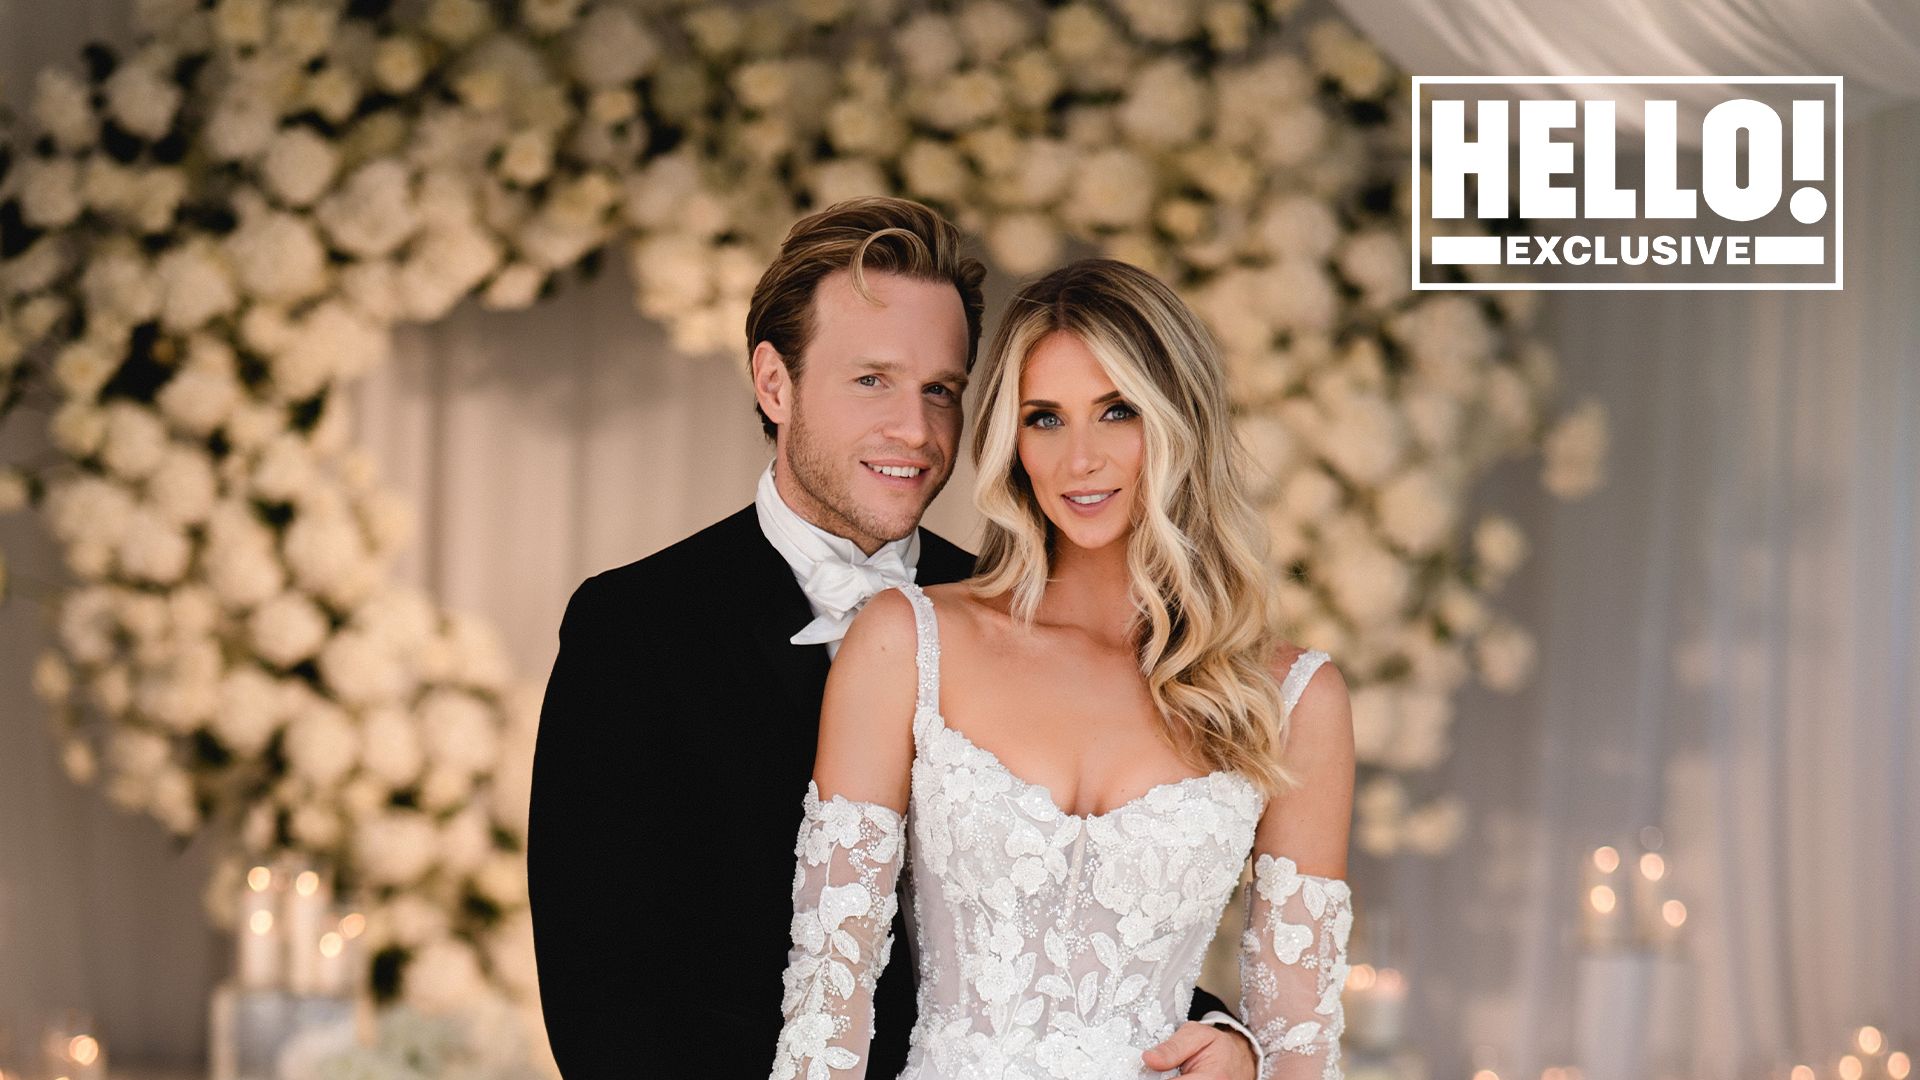 Exclusive: inside Olly Murs and Amelia Tank’s magical wedding - see all ...